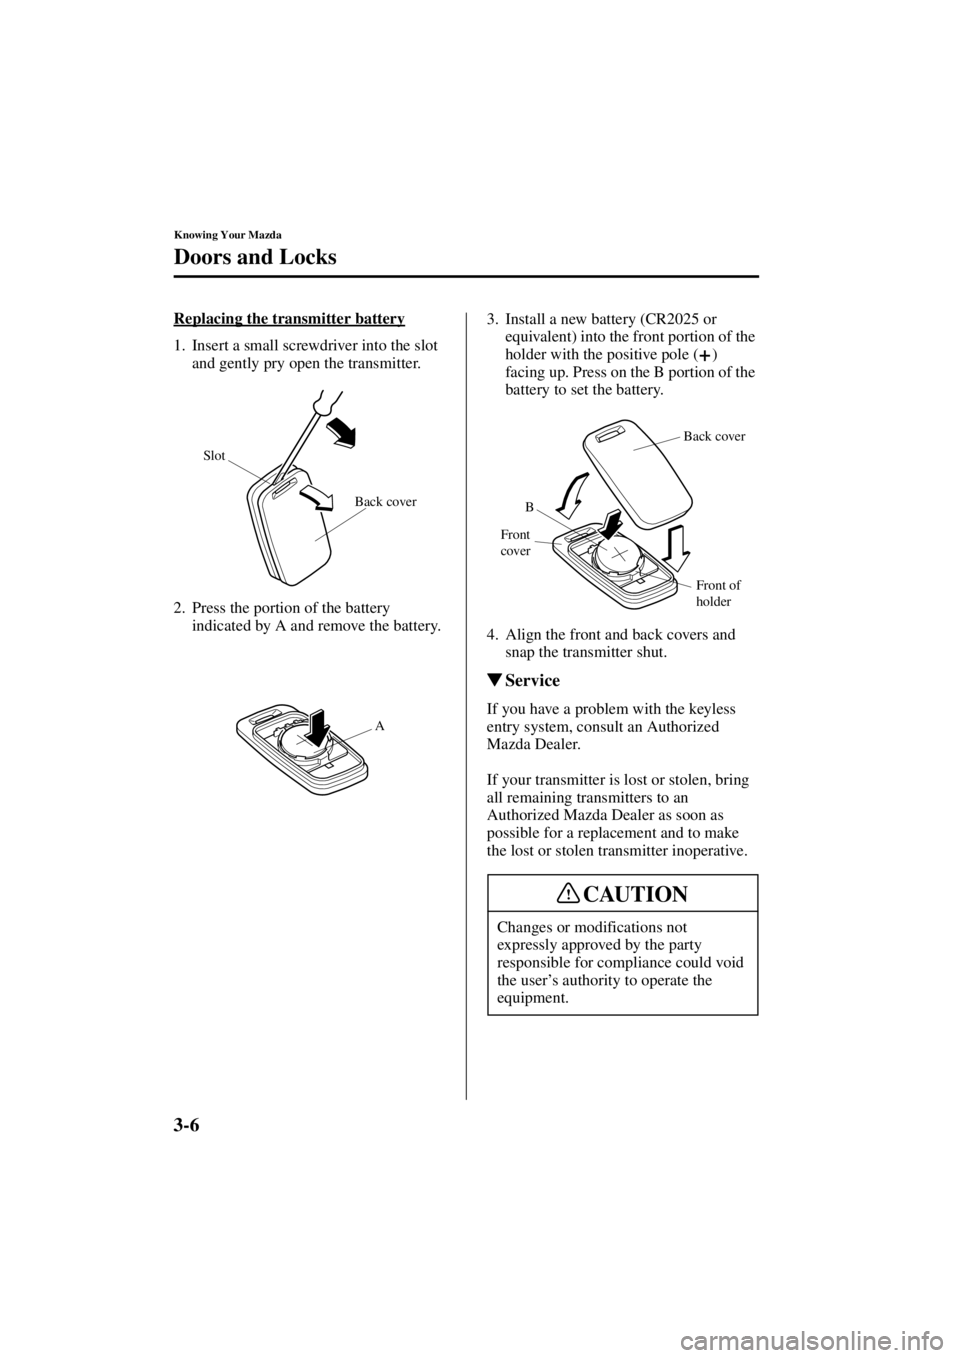 MAZDA MODEL 3 5-DOOR 2004 Manual PDF 3-6
Knowing Your Mazda
Doors and Locks
Form No. 8S18-EA-03I
Replacing the transmitter battery
1. Insert a small screwdriver into the slot and gently pry open the transmitter.
2. Press the portion of t